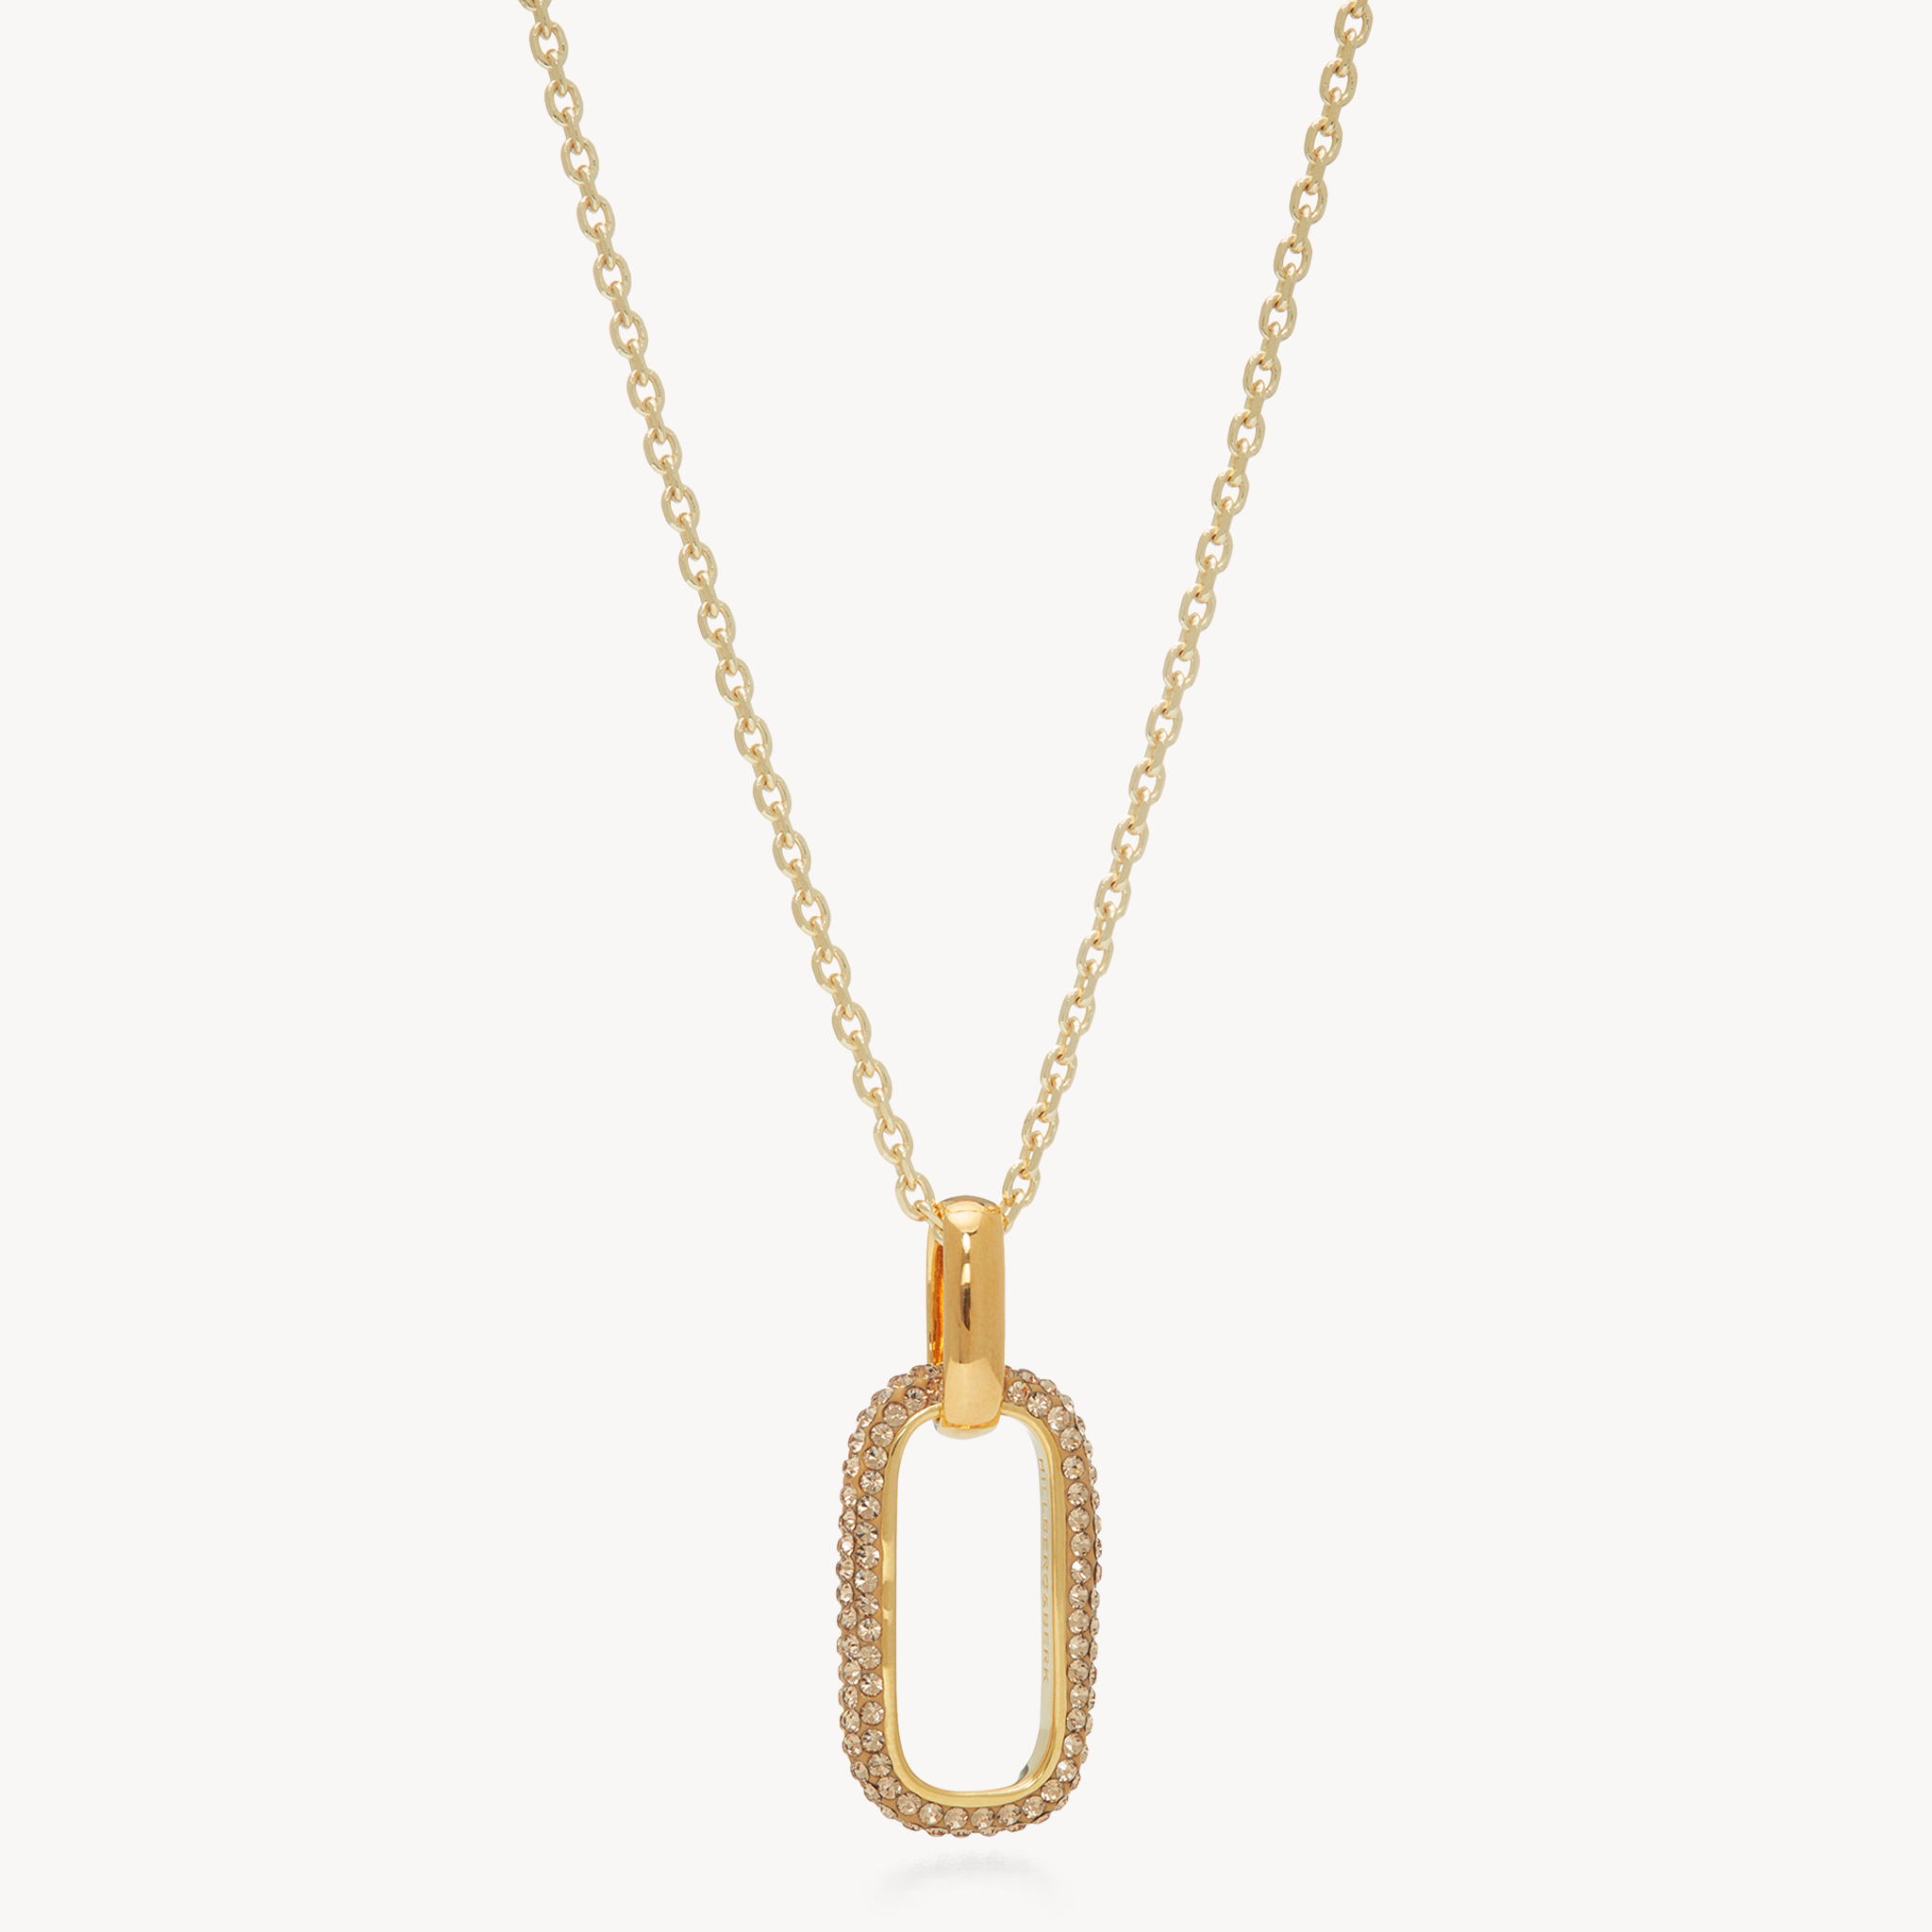 FLASH JEWELLERY Dylan Dome Necklace Black Cord - Laneway Boutique